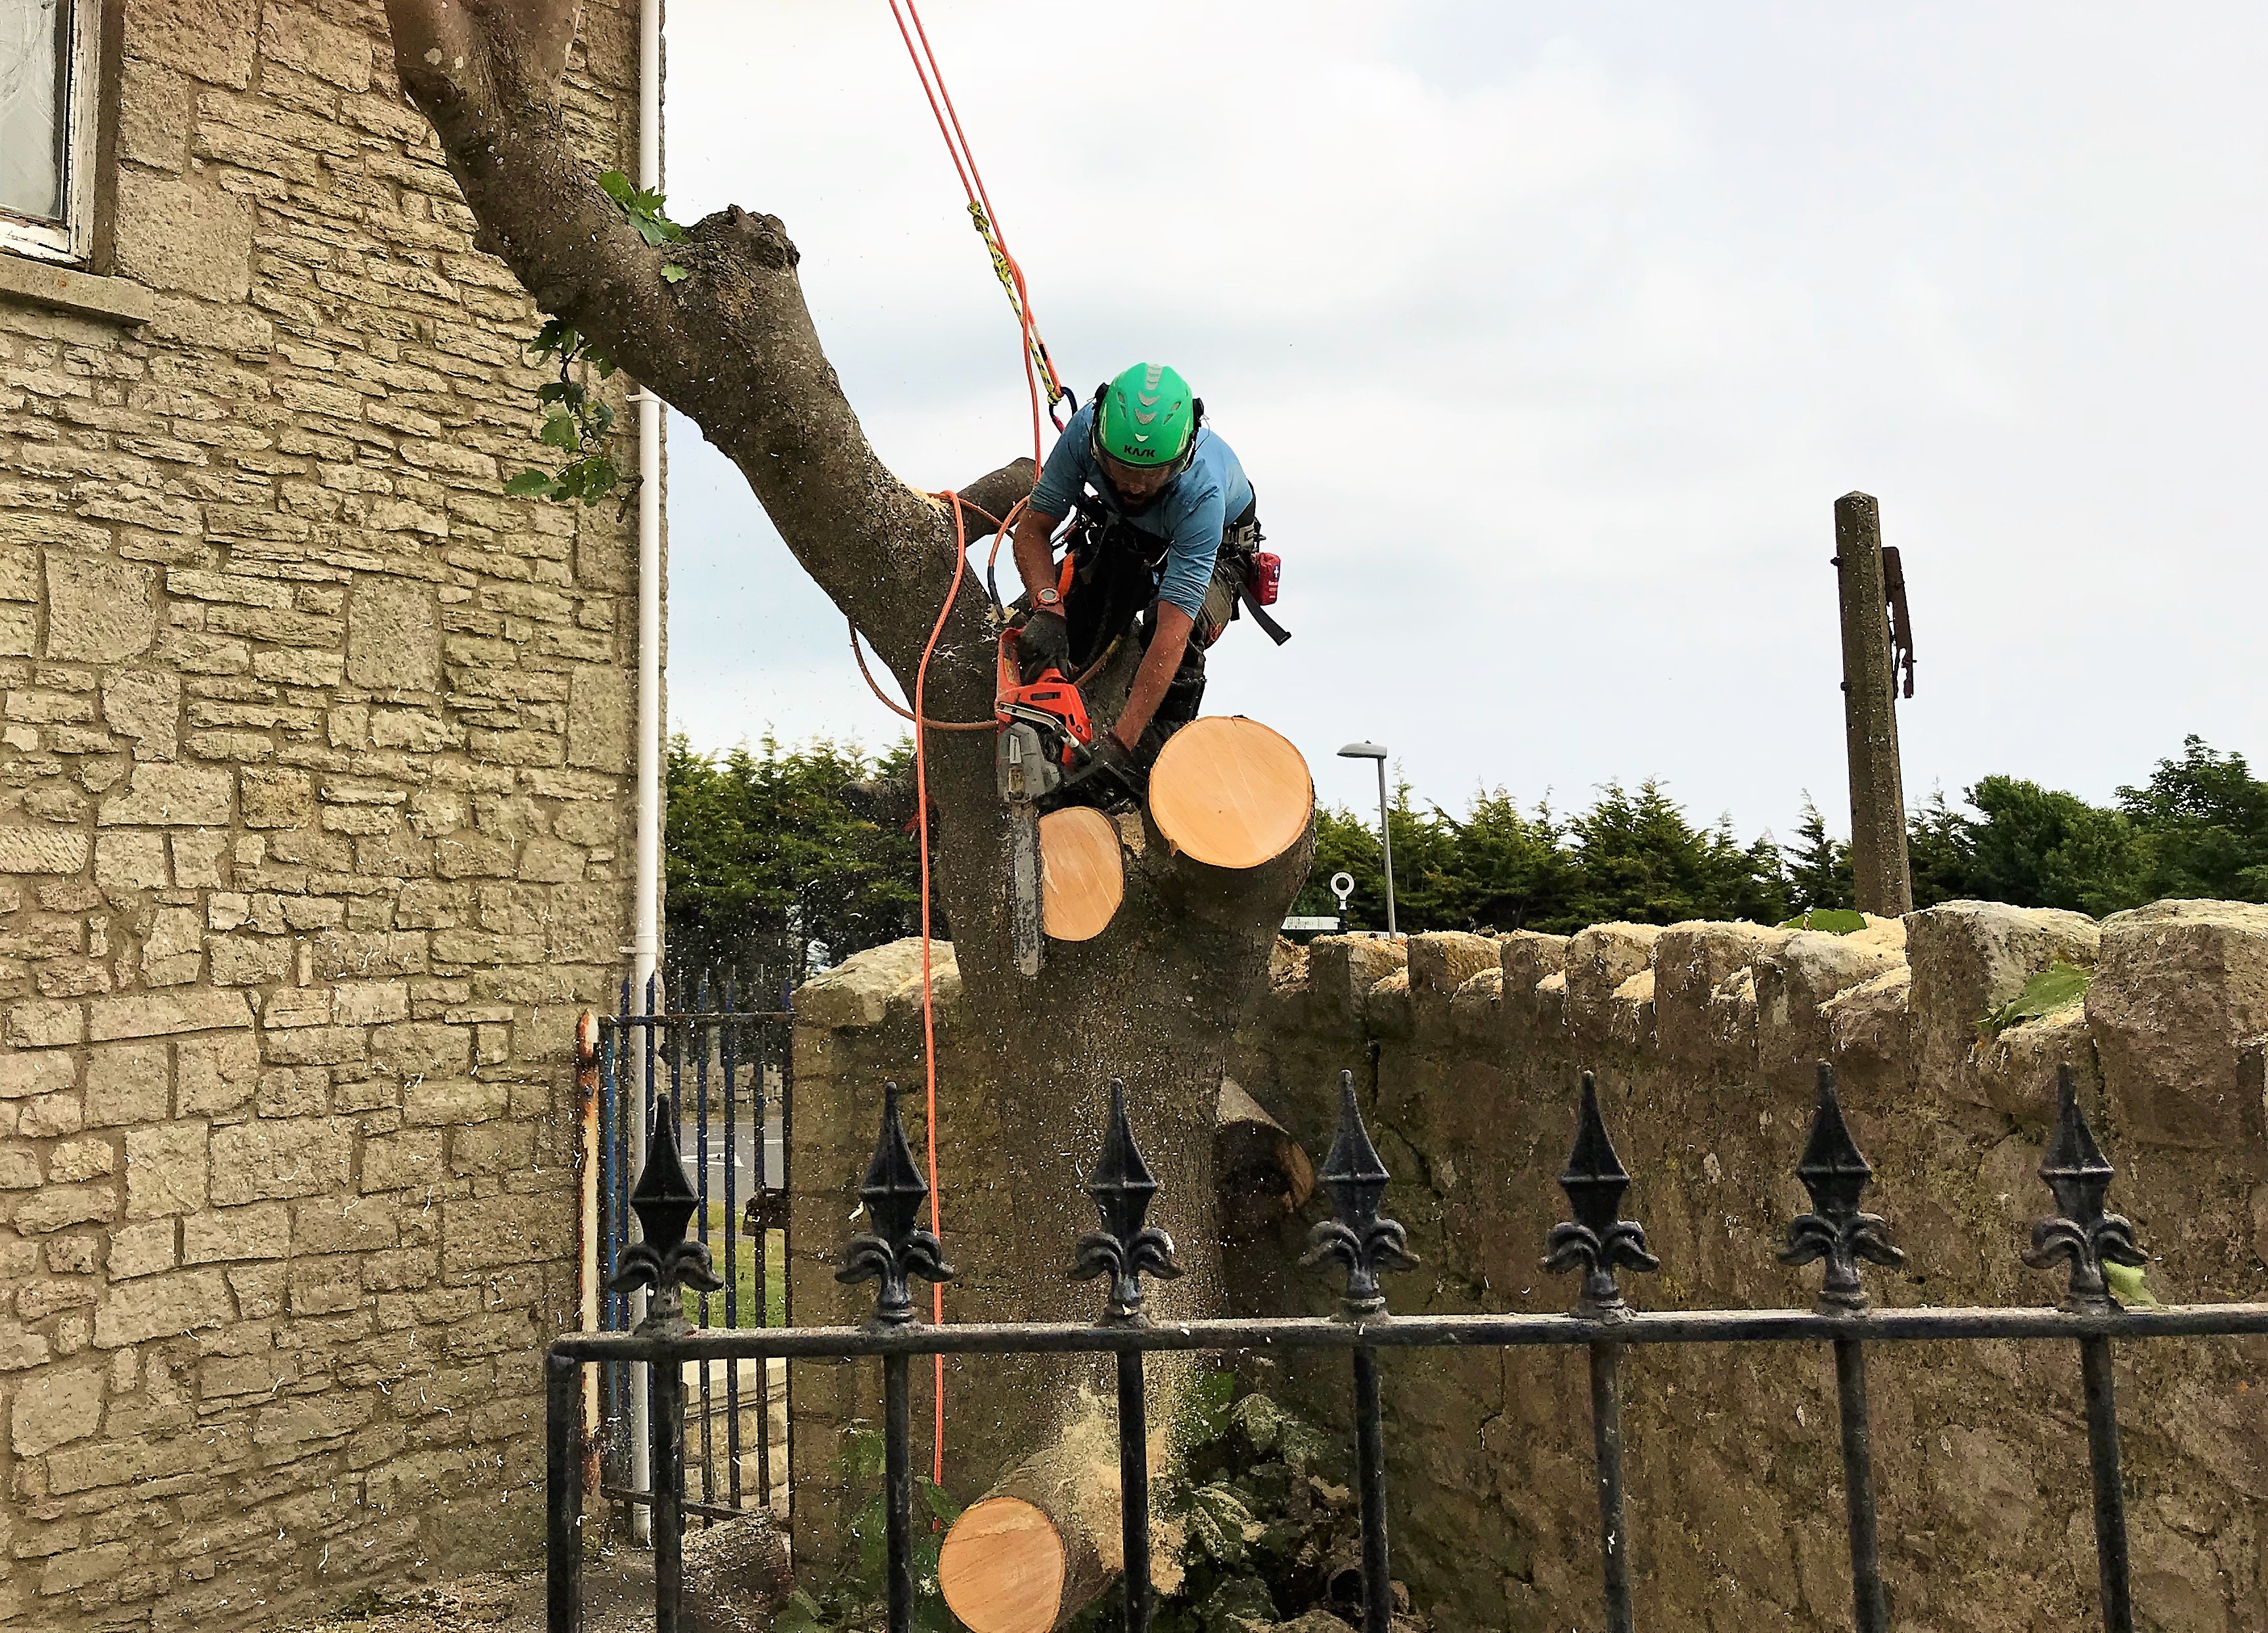 Tree Removal - Tree Felling in Weymouth, Dorchester, Portland, Dorset - Weymouth tree surgeon - Tree climber cutting a tree with a chainsaw.